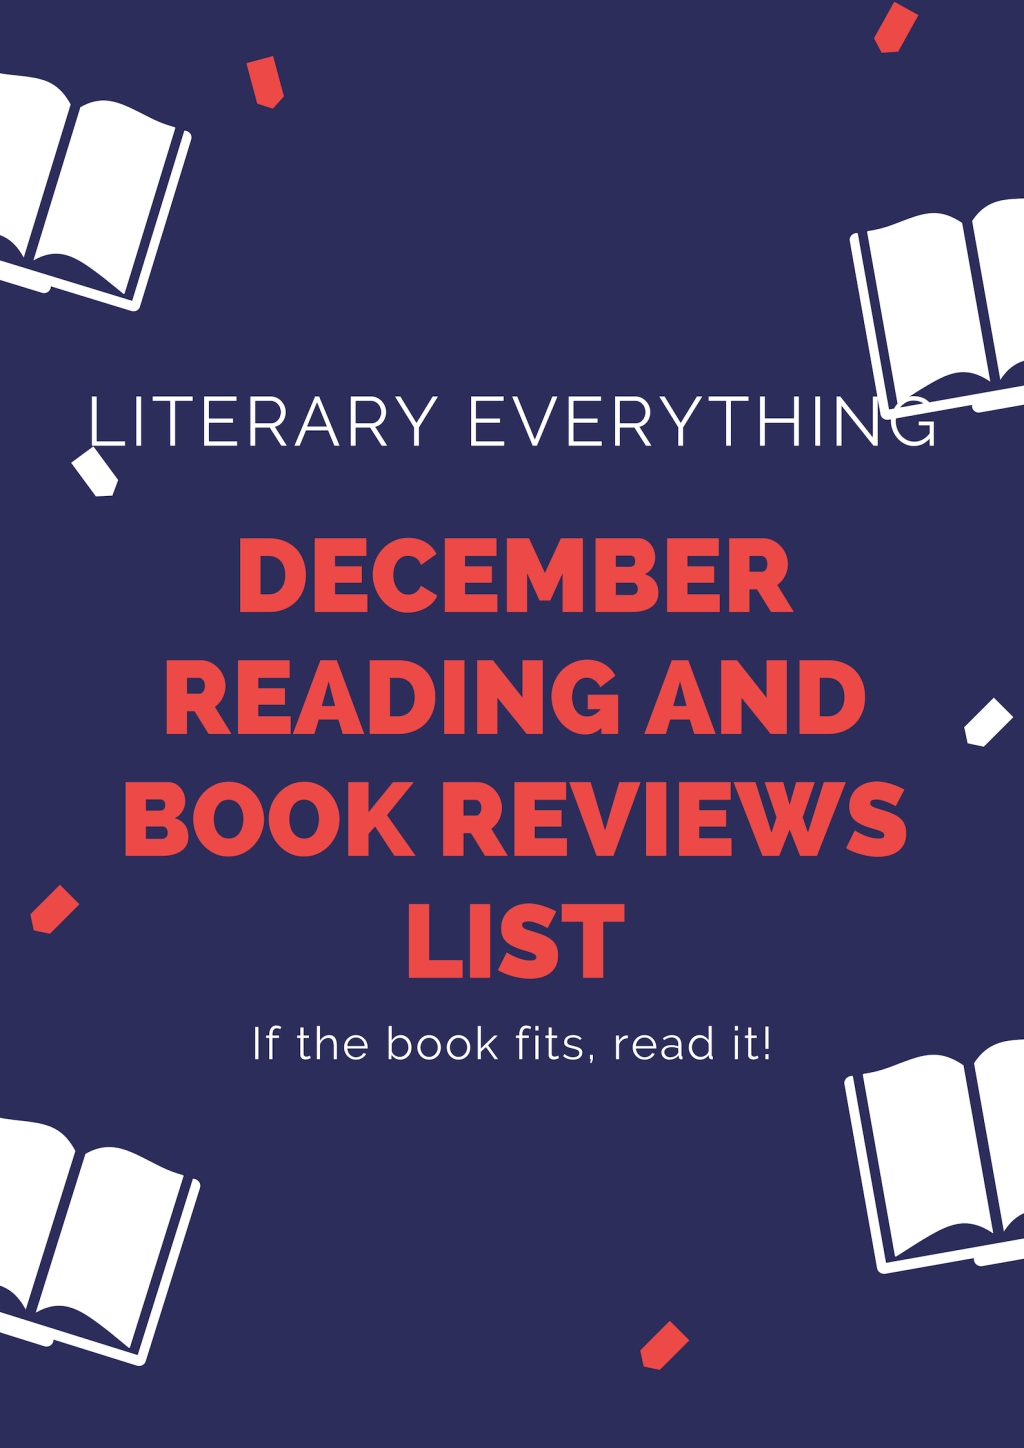 December 2018 Reading and Book Reviews List